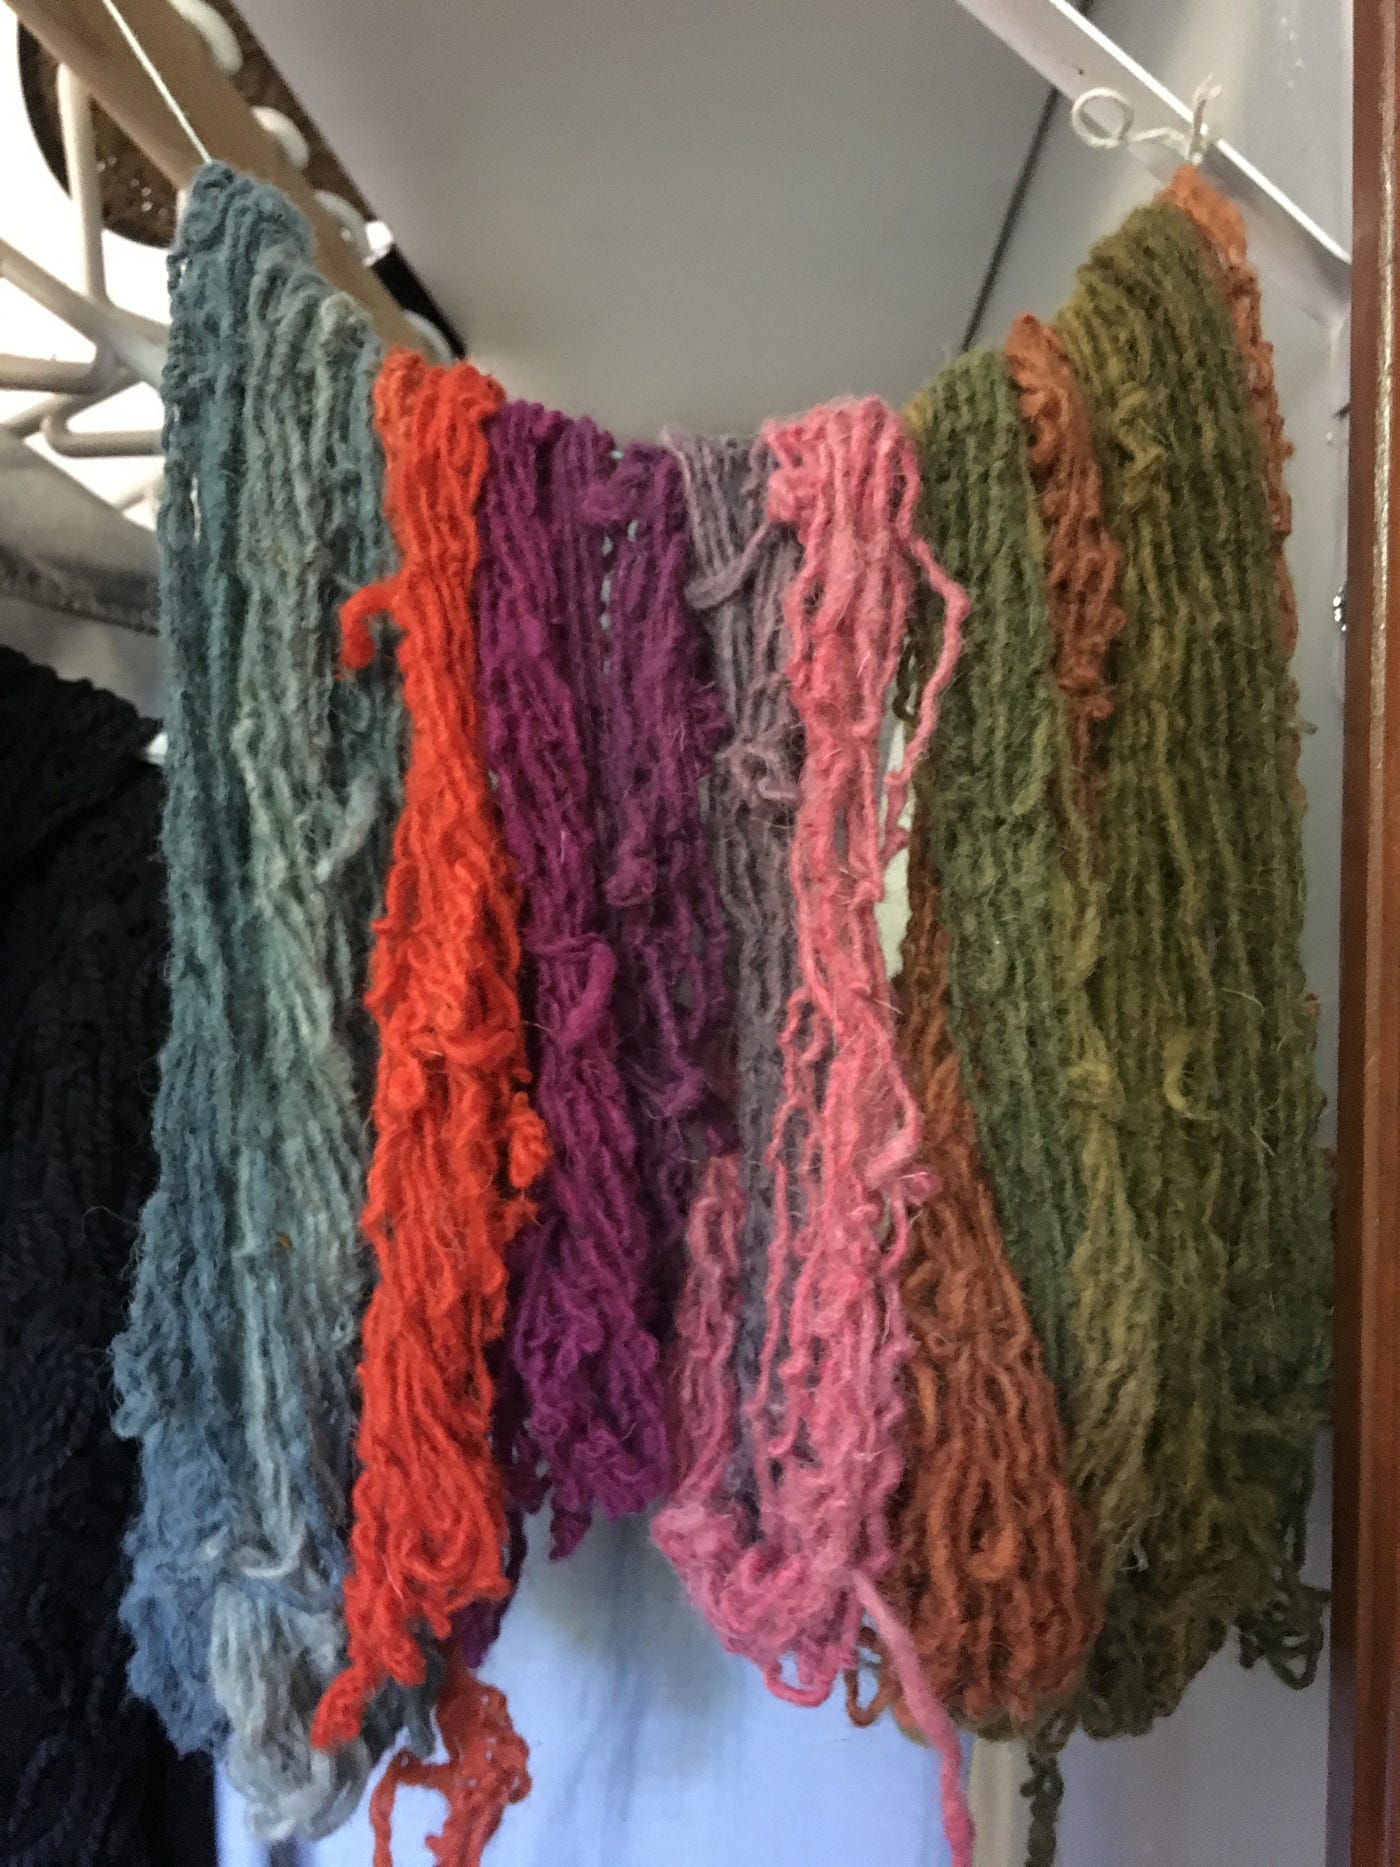 Dye samples from the natural dye workshop I taught a couple weeks ago. On  the left: Coffee beans on wool yarn, linen, si…